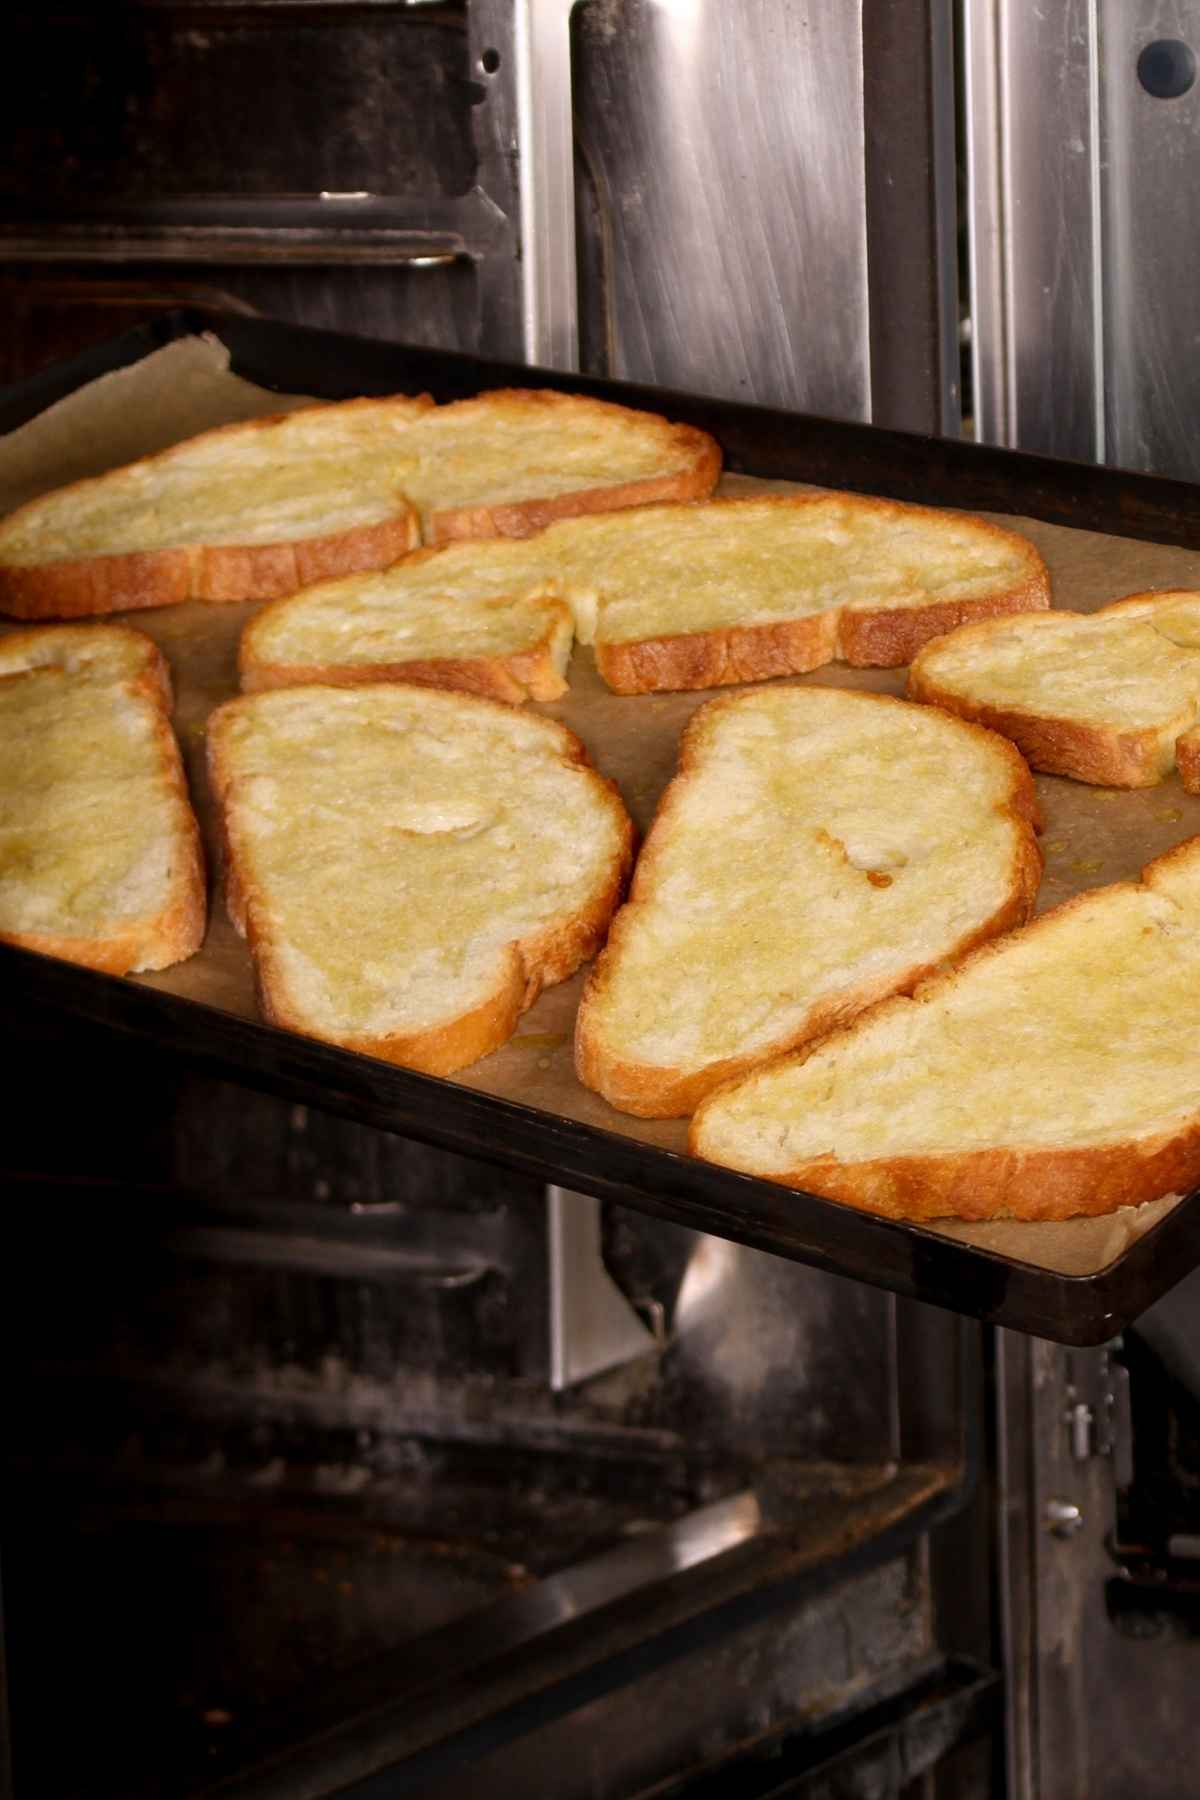 The oven can toast many slices of bread, or bagels for a big crowd, whatever you have on hand. Read on to learn about the best ways to Toast Bread in the Oven.